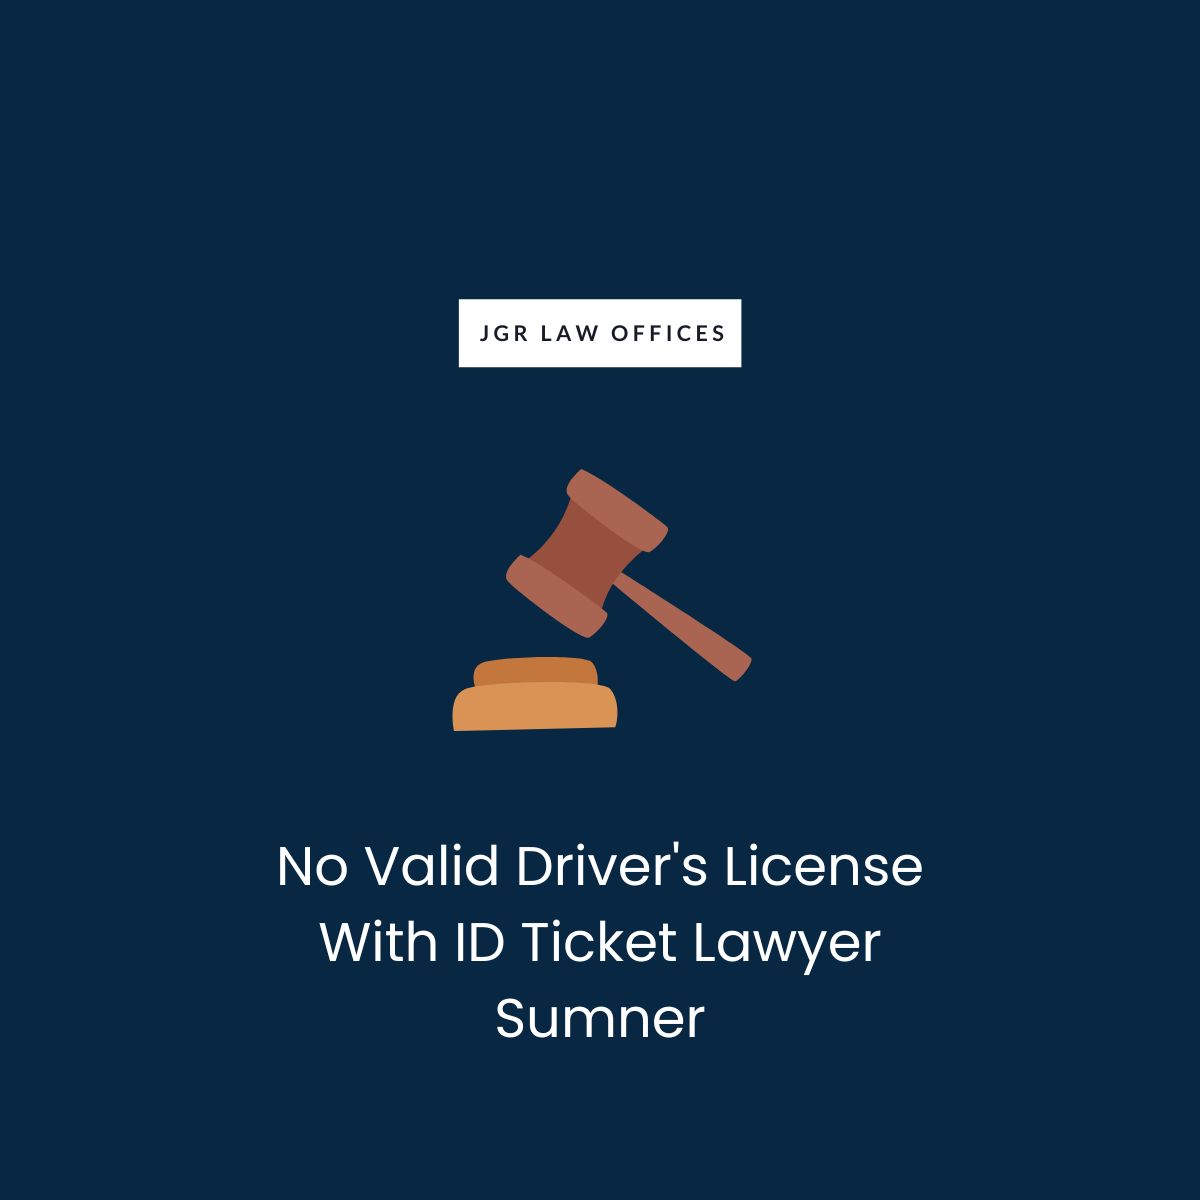 No Valid Driver's License With ID Ticket Attorney Sumner